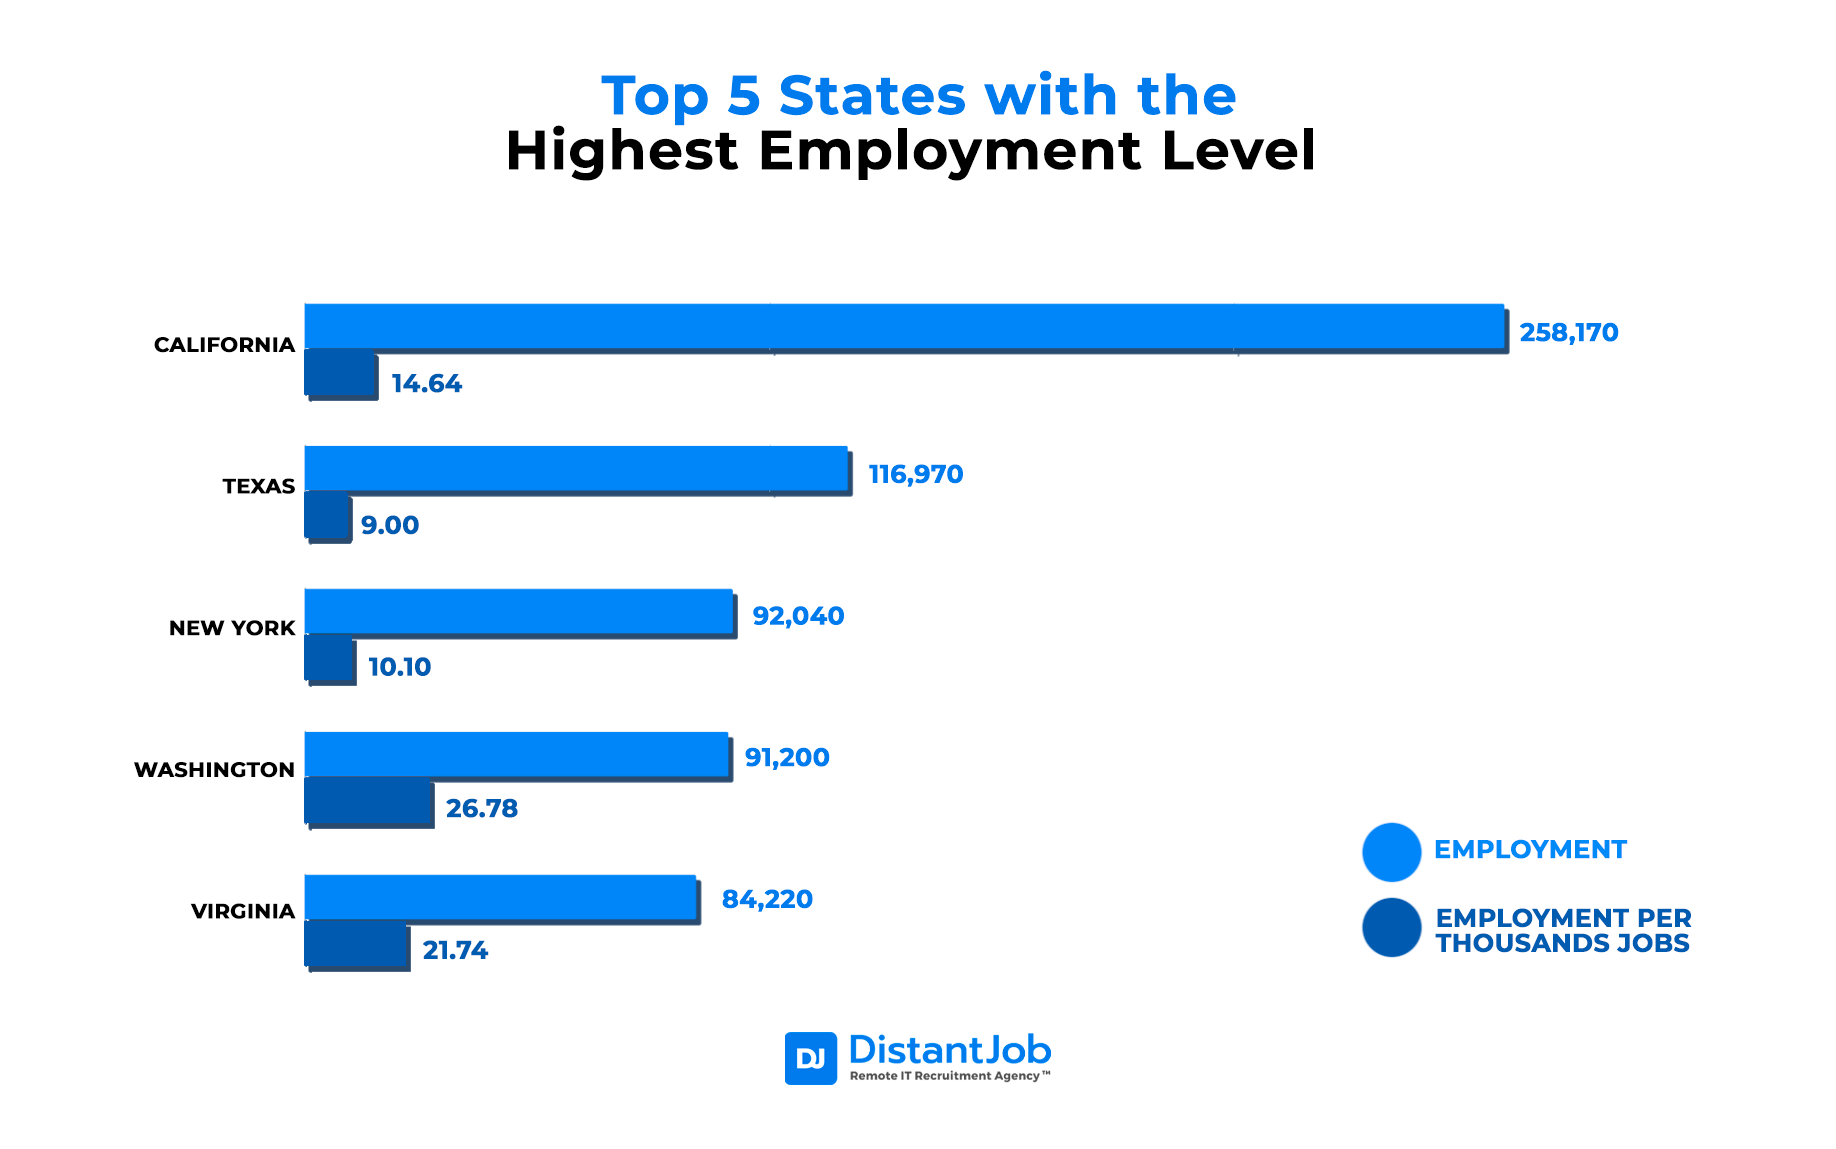 States with the highest employment level